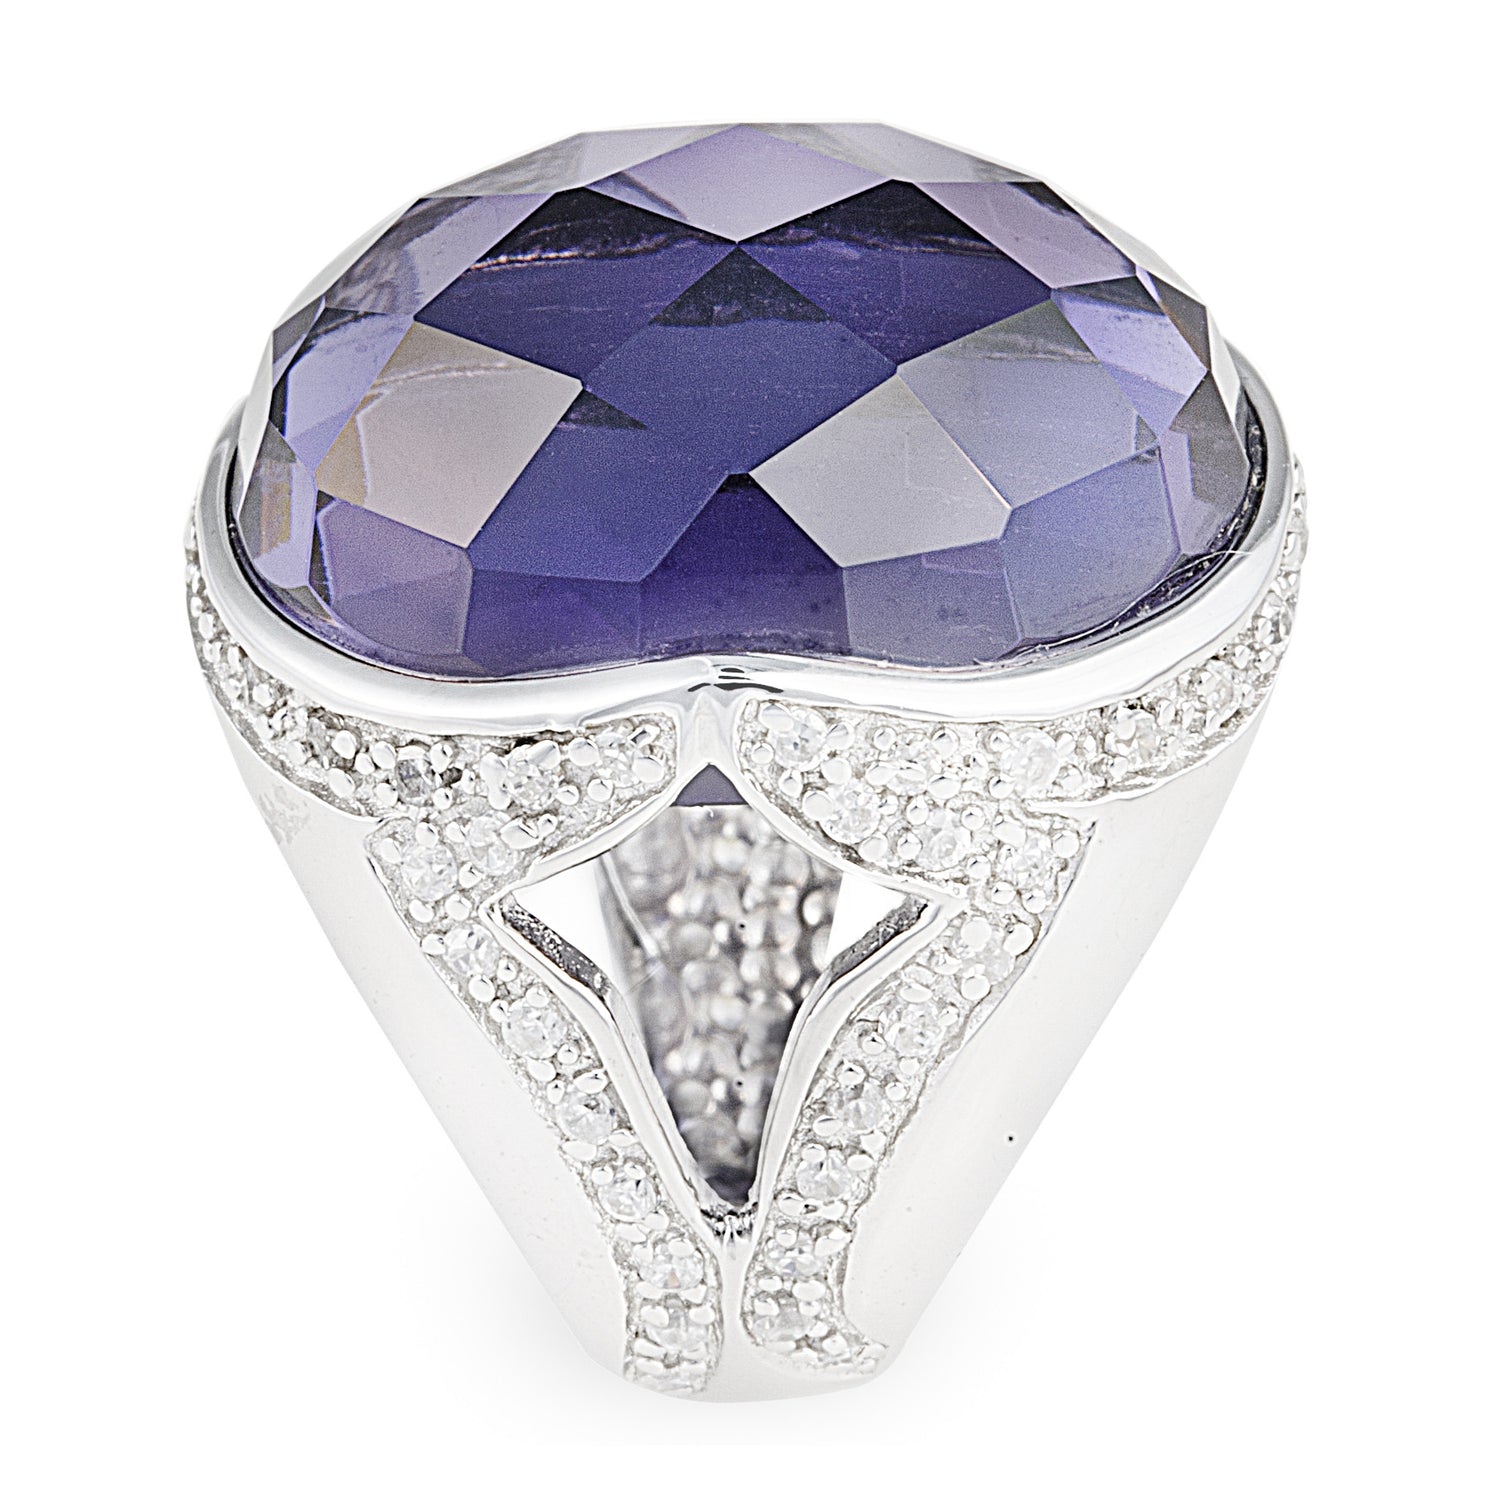 The Lavender Lopez Ring is an elegant 925 sterling silver ring featuring a beautiful side pattern encrusted with cubic zirconia stones that hold in place a stunning facet cut purple obsidian that grabs lots of attention. Matching earrings are available. Worldwide Shipping. Free shipping for orders $150+ in Australia.